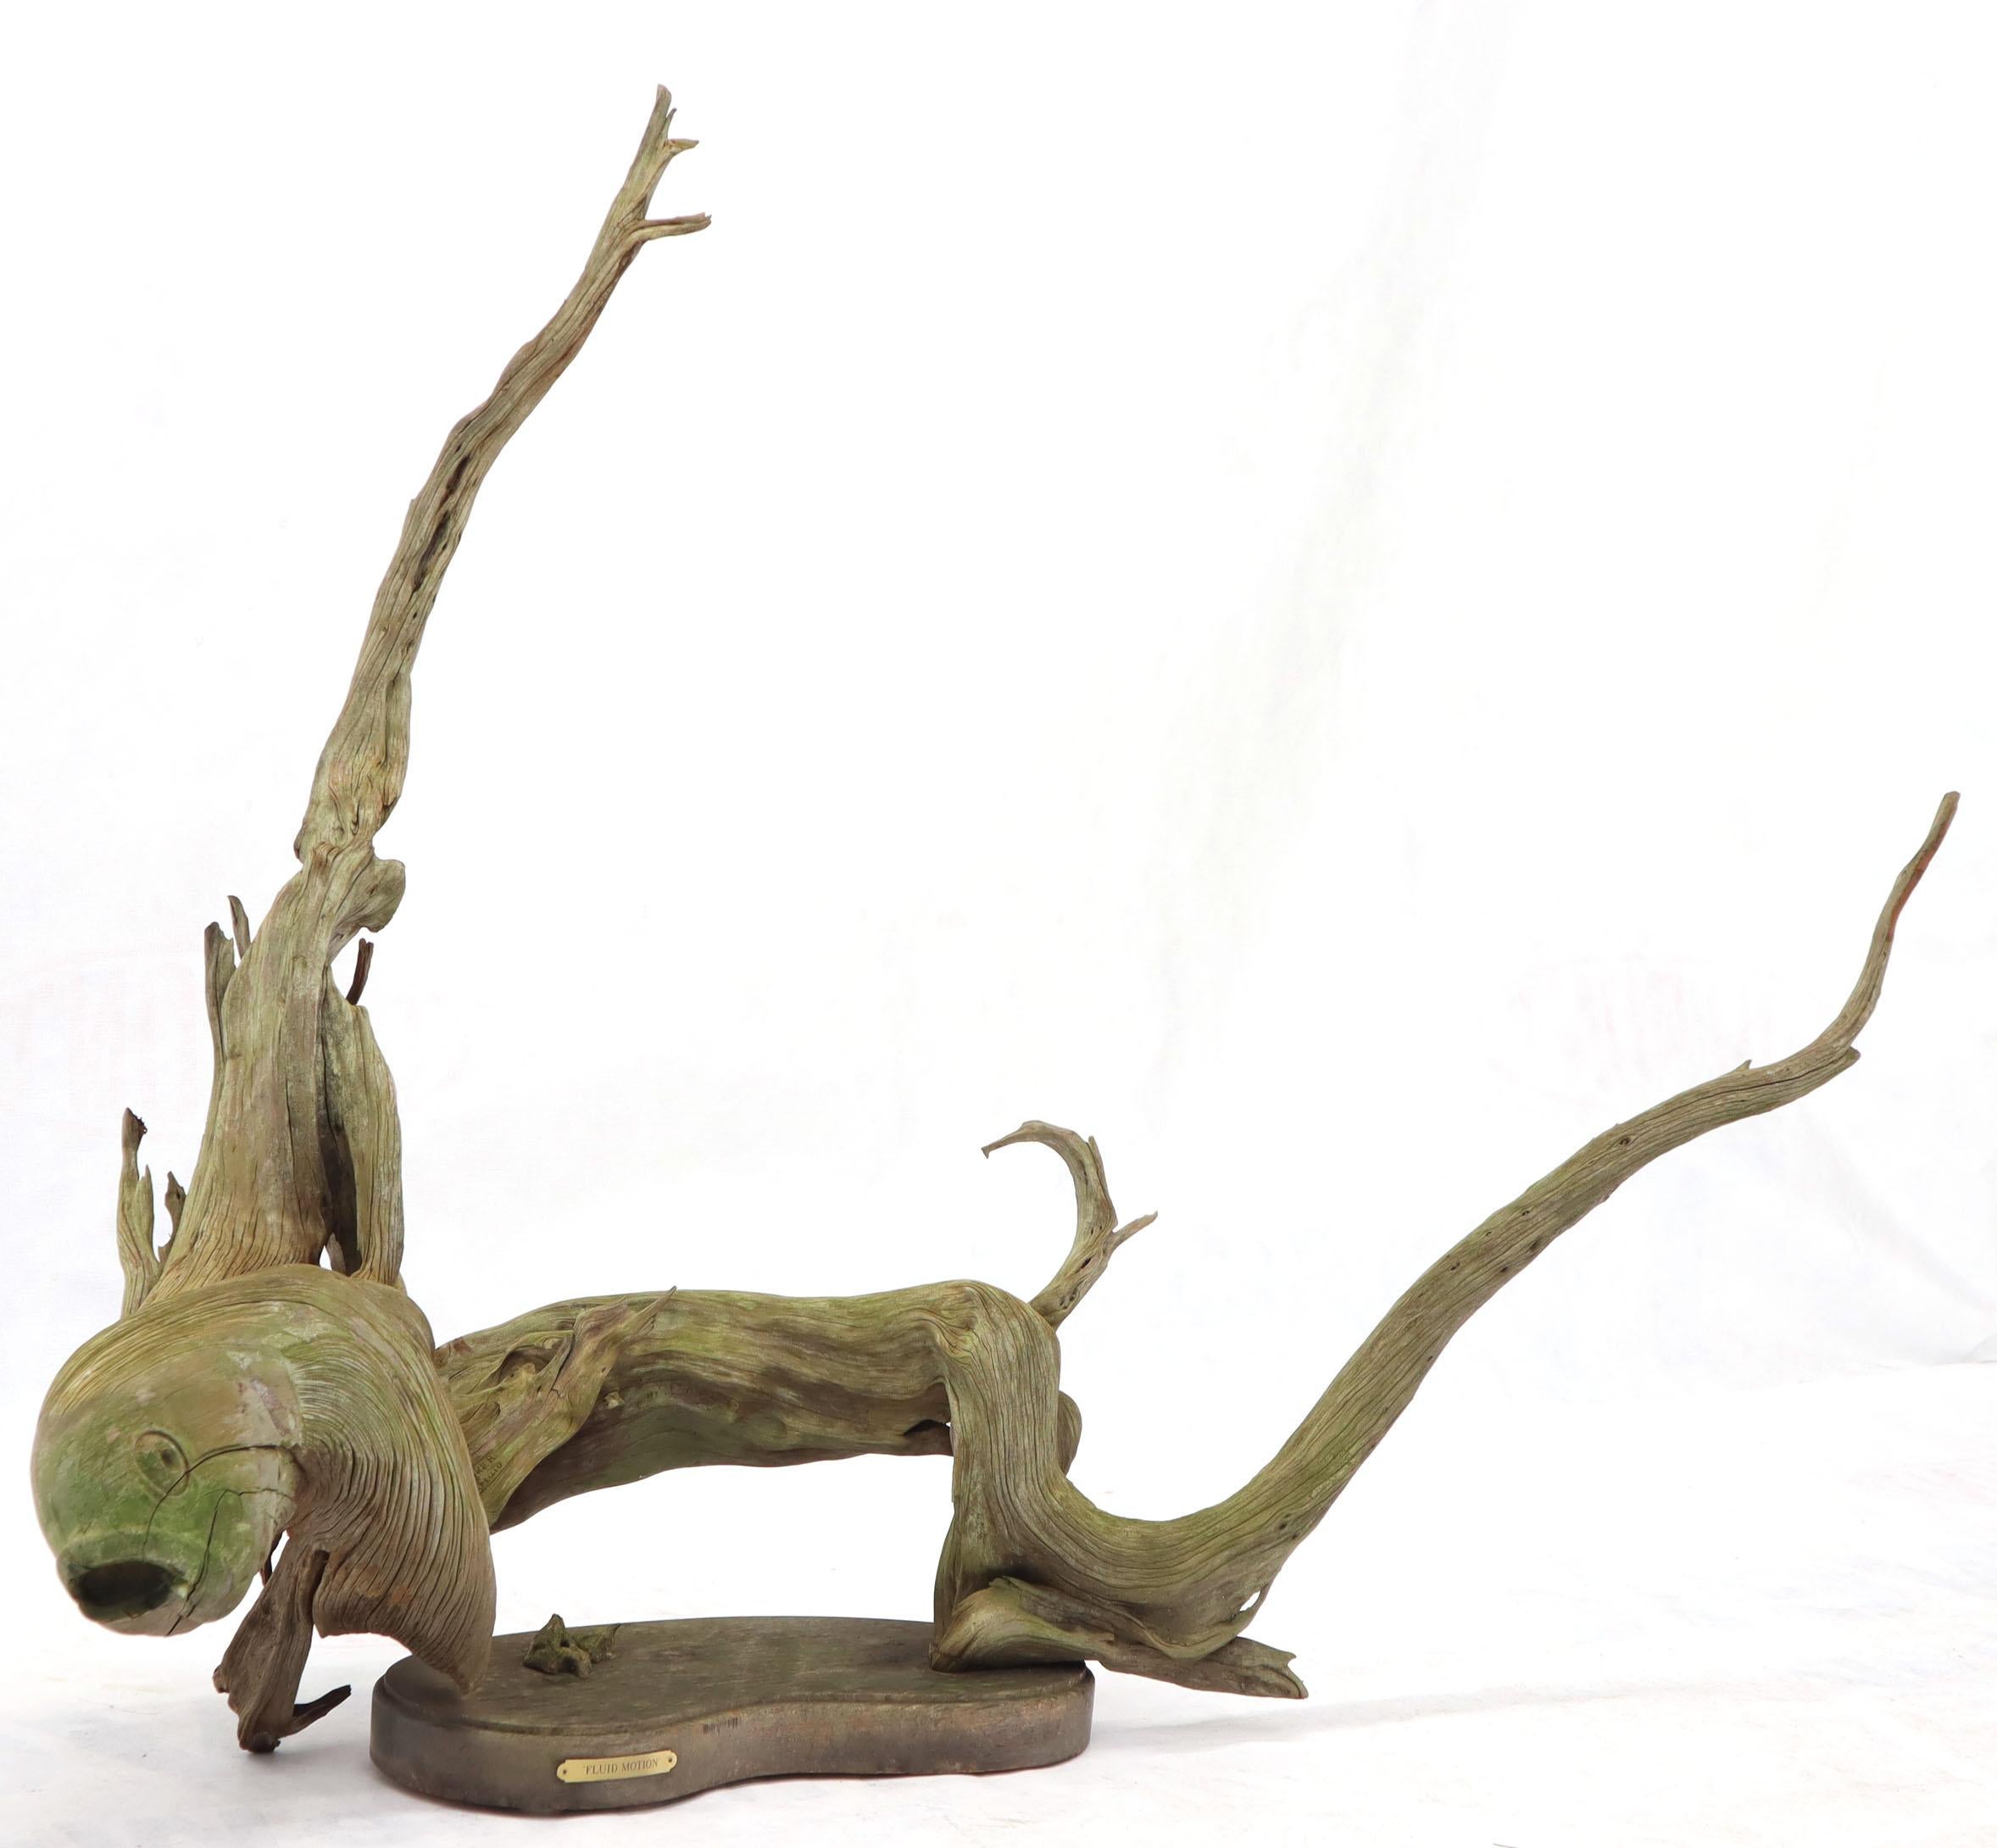 Midcentury abstract natural driftwood fish forming sculpture.